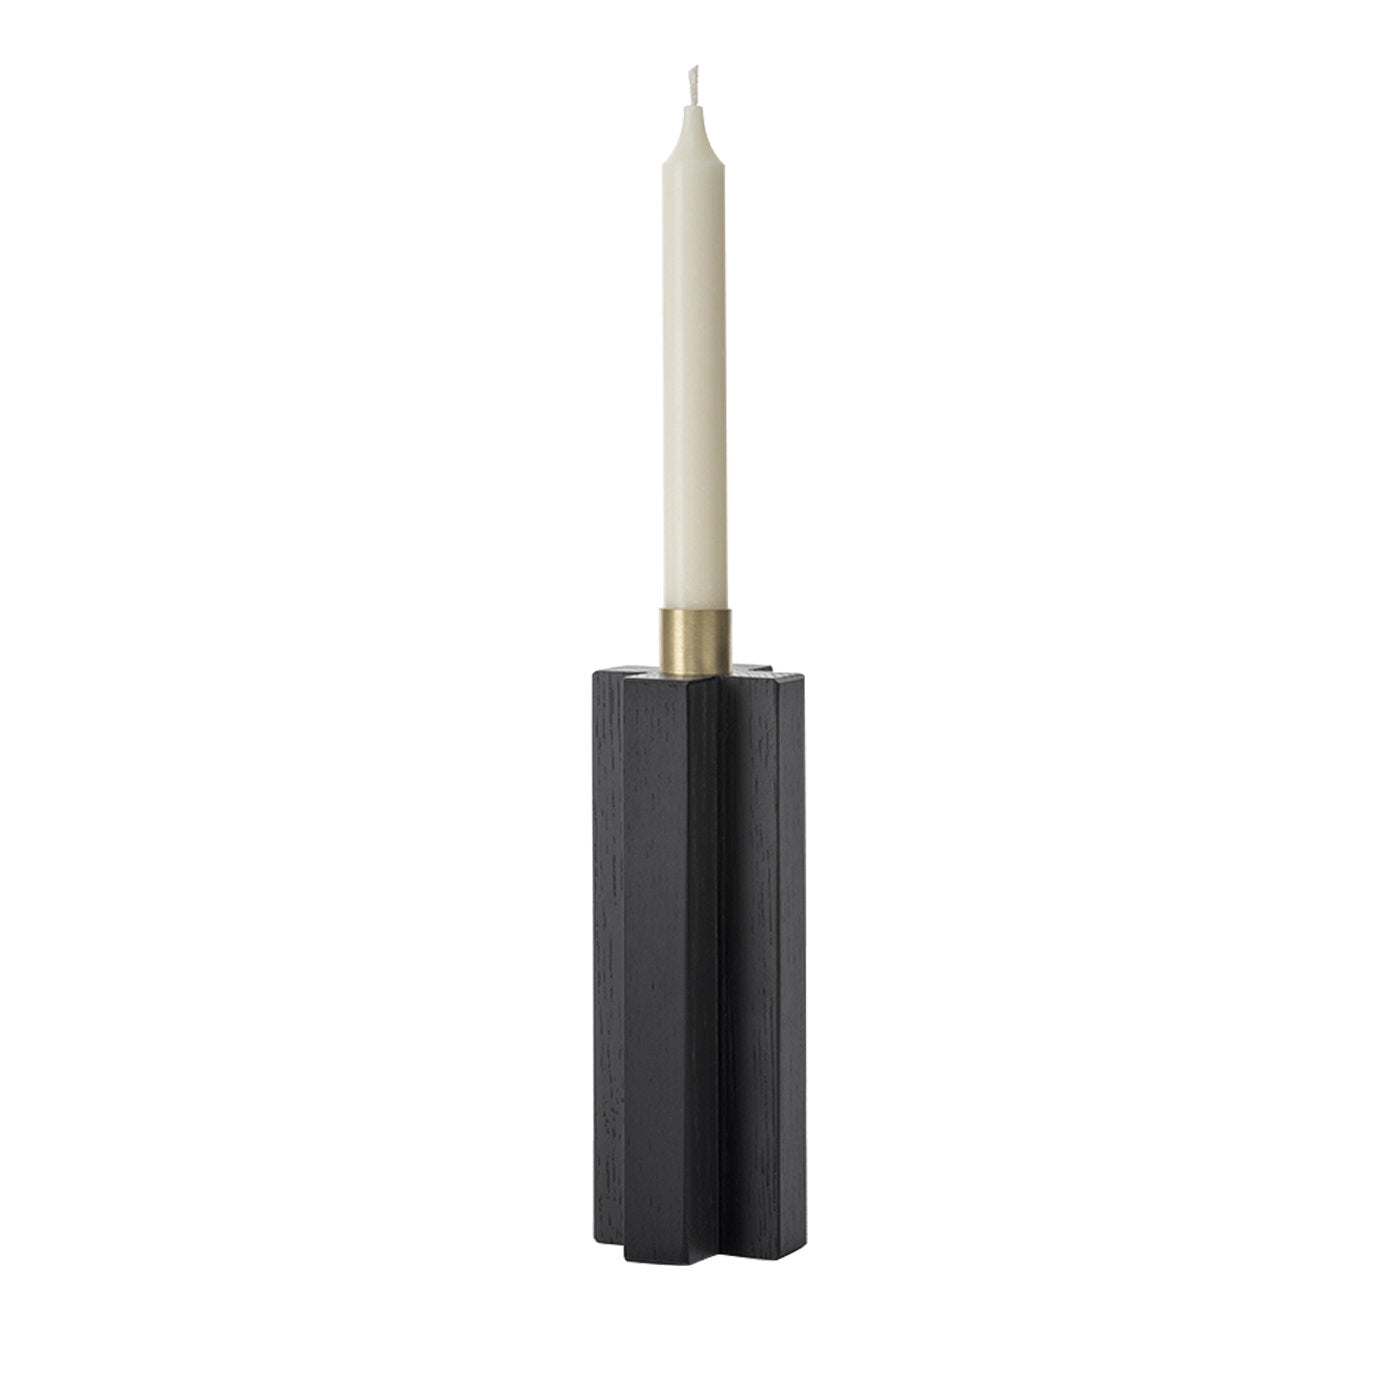 Constantin Cross Candle Holder by Agustina Bottoni - Main view